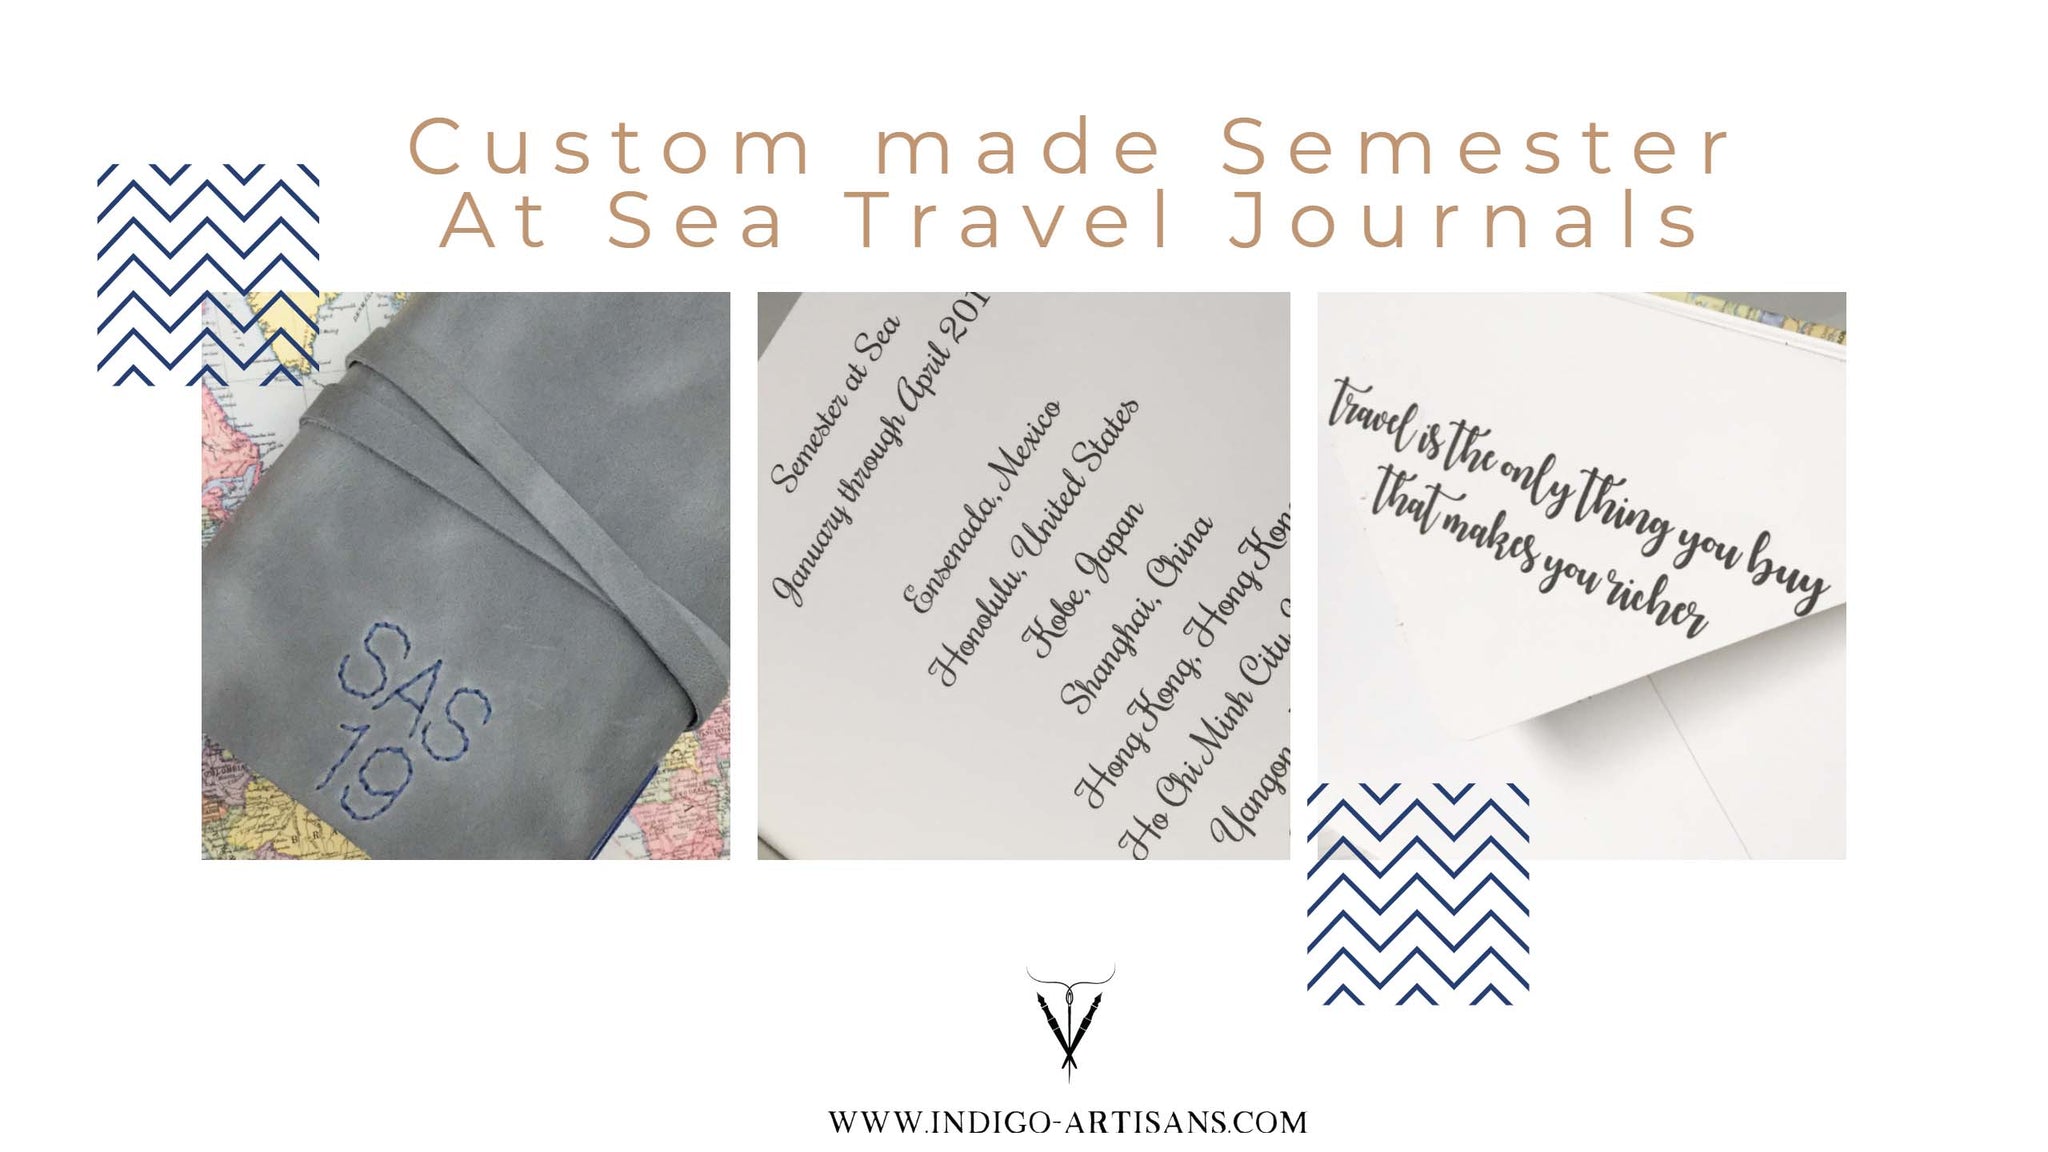 Personalized custom made semester at sea travel journals